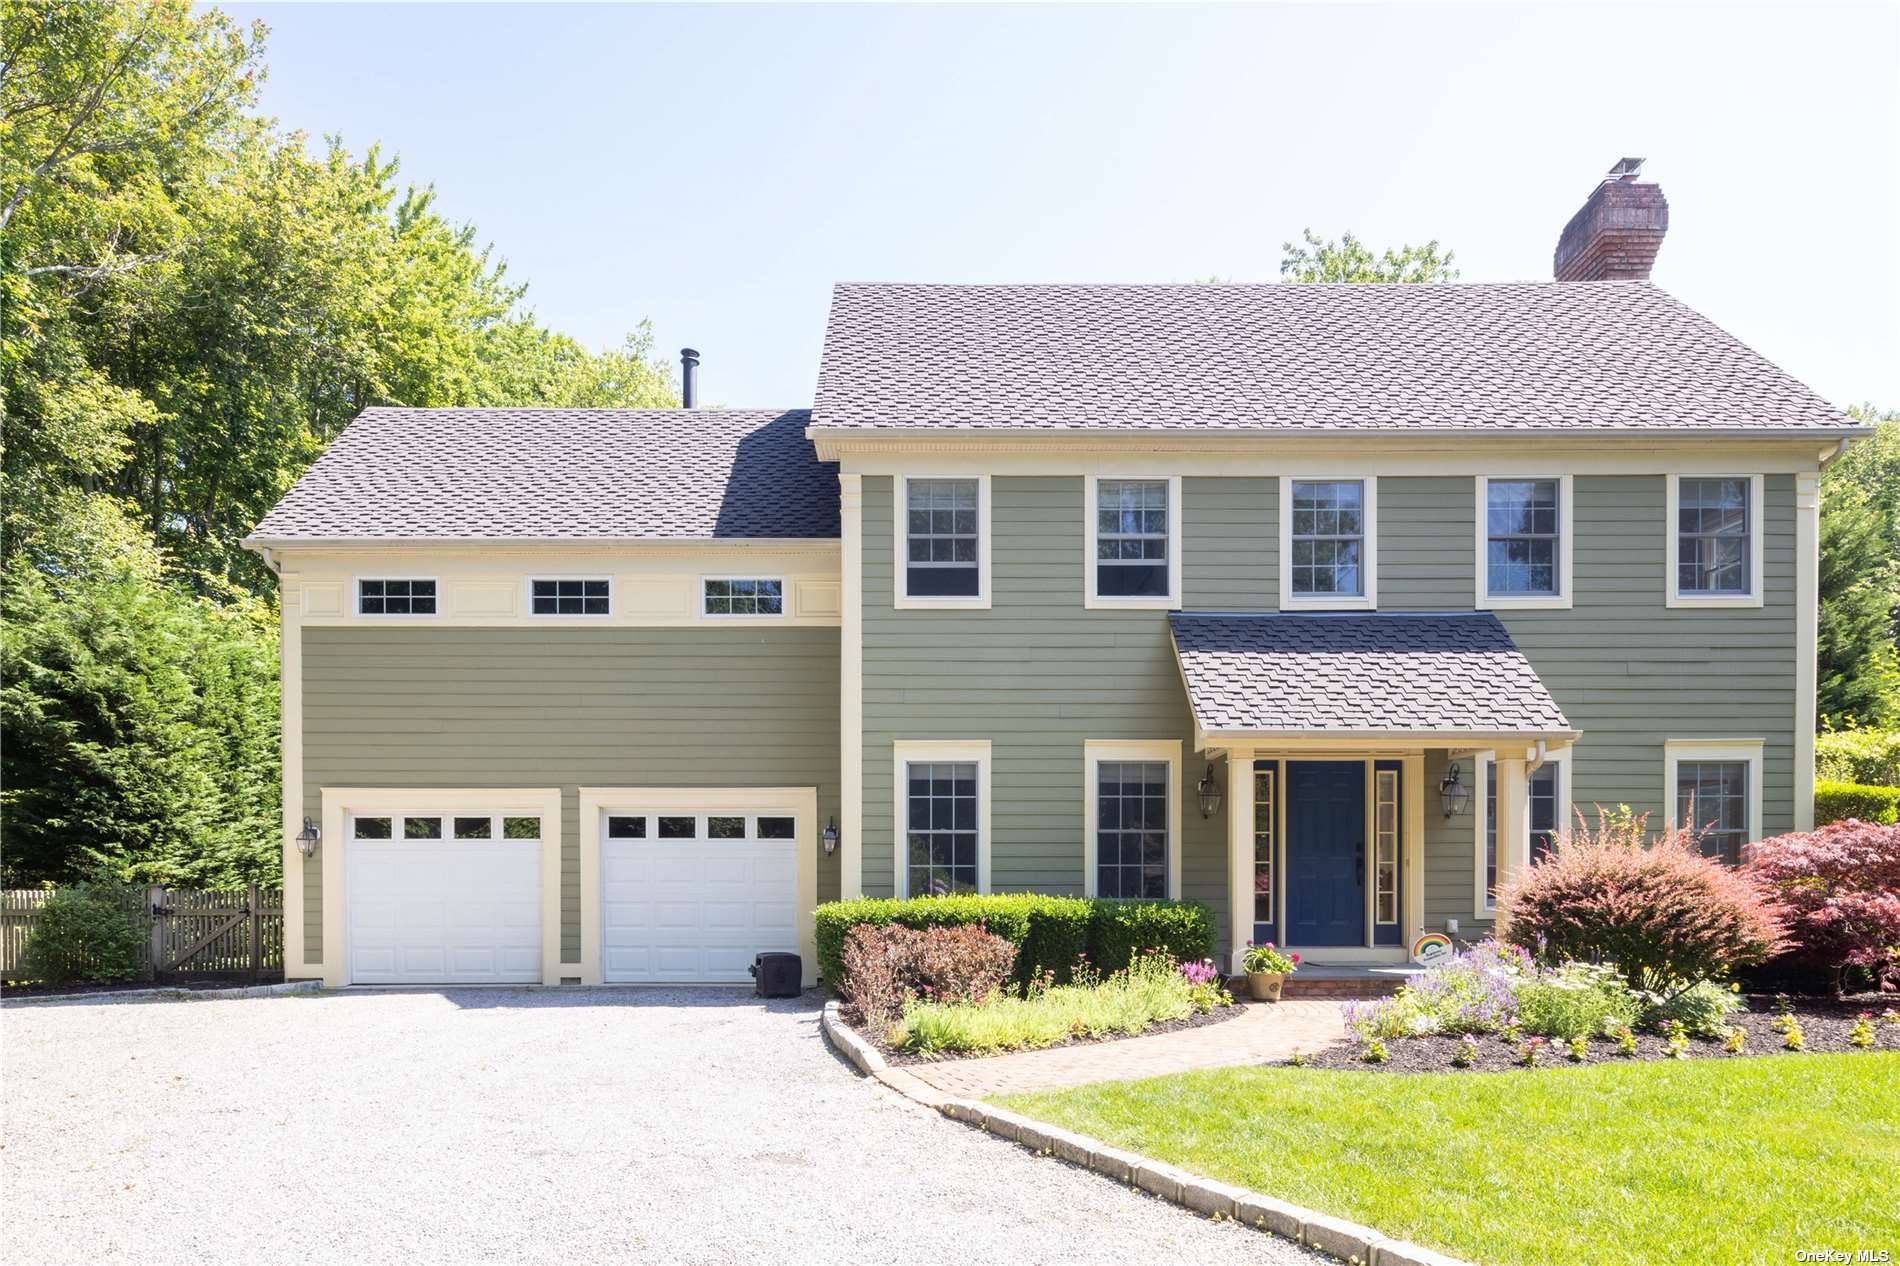 This beautiful home in Southold Shores is a rare find and perfect for those looking to enjoy all the benefits of waterfront community living without giving up modern comforts.